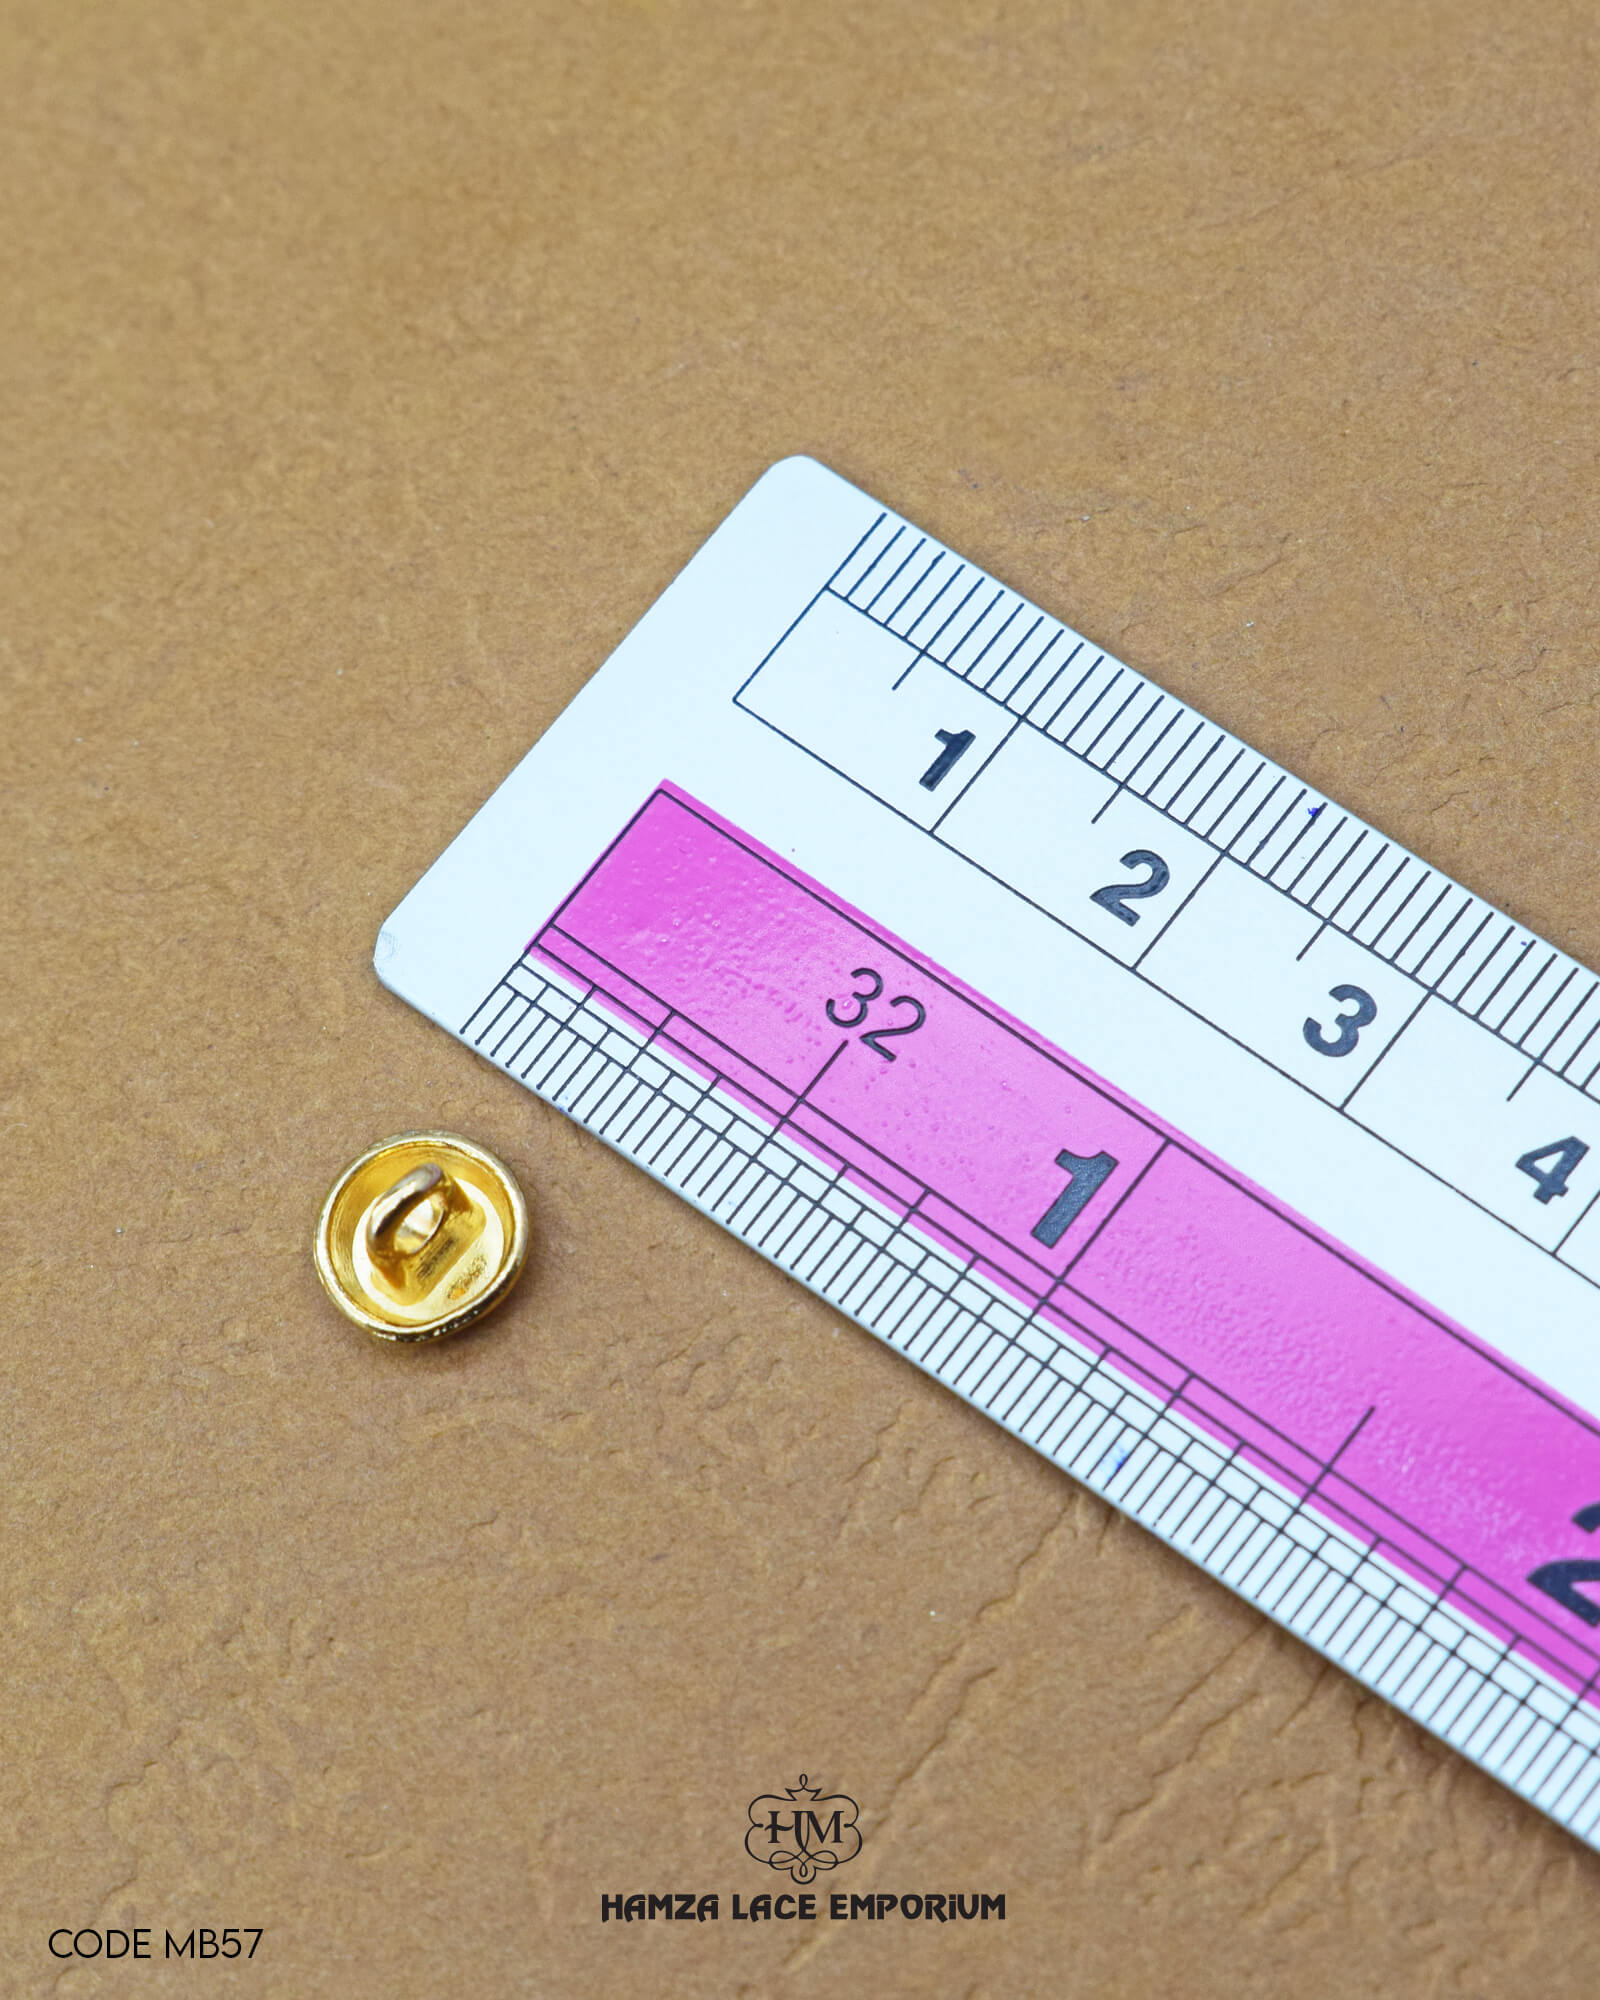 The size of the 'Metal Suiting Button MB57' is measured by using a ruler